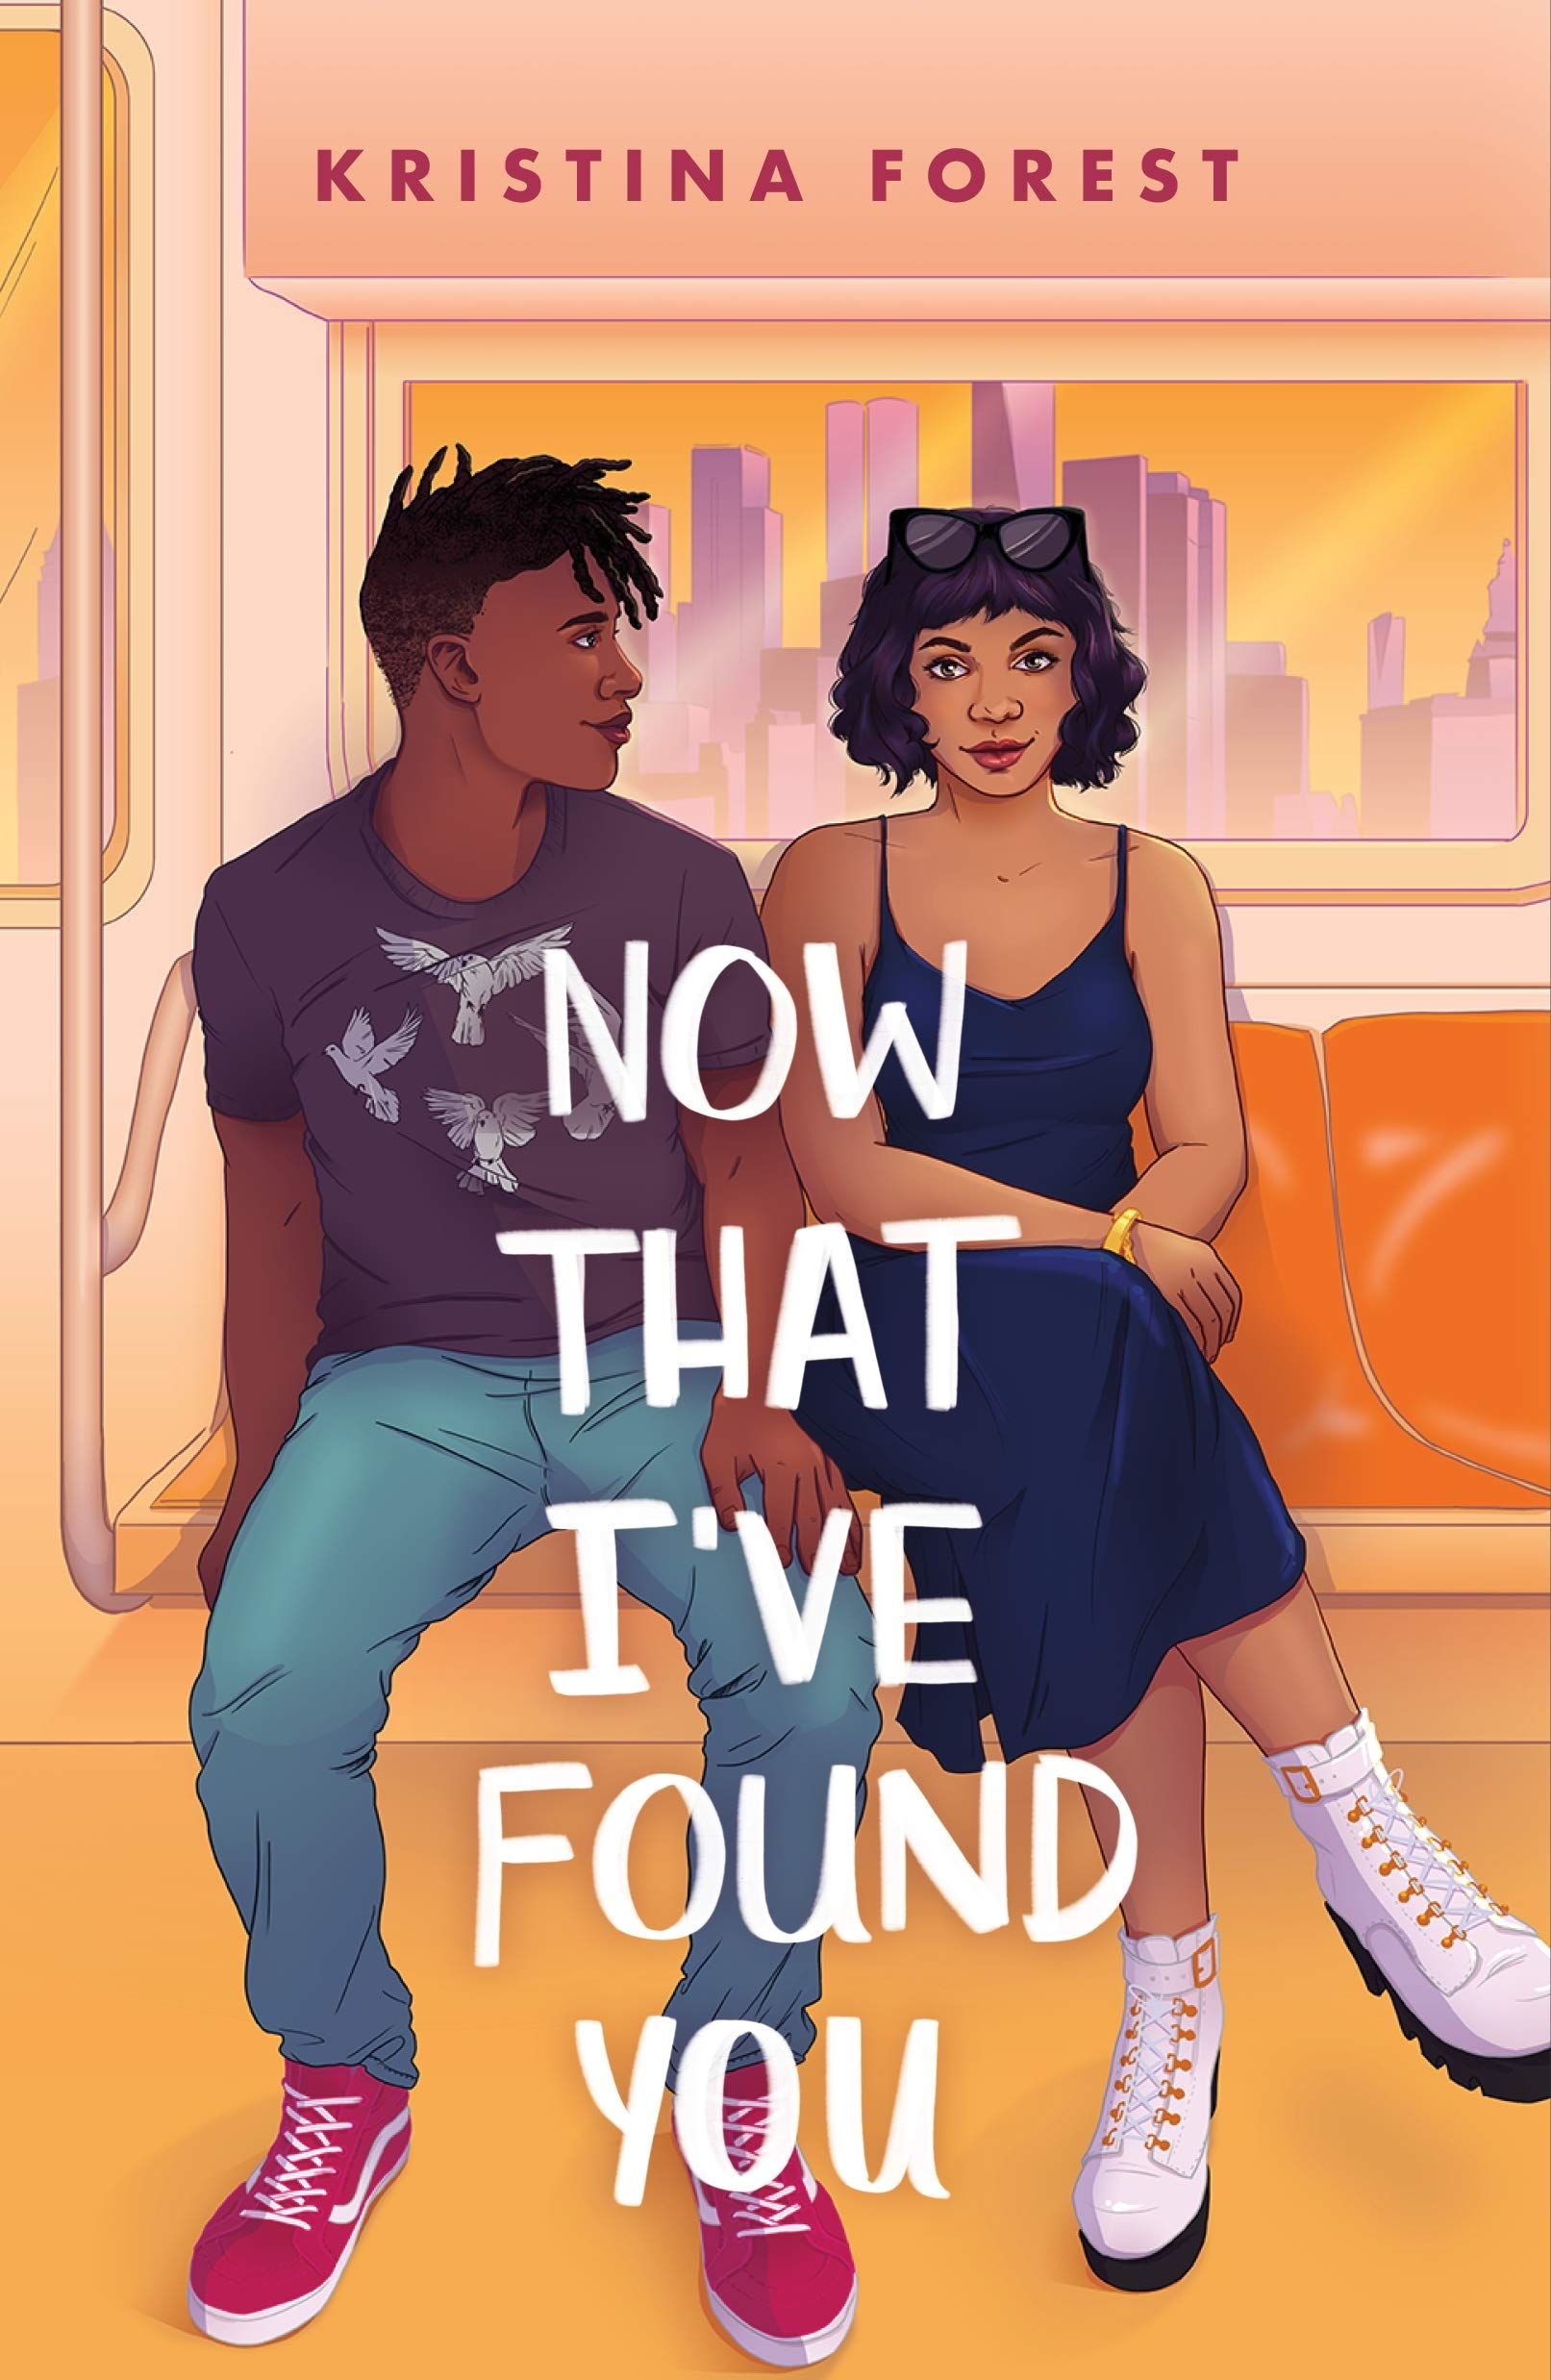 Cover Image of "Now that I've Found You" by Kristina Forest.